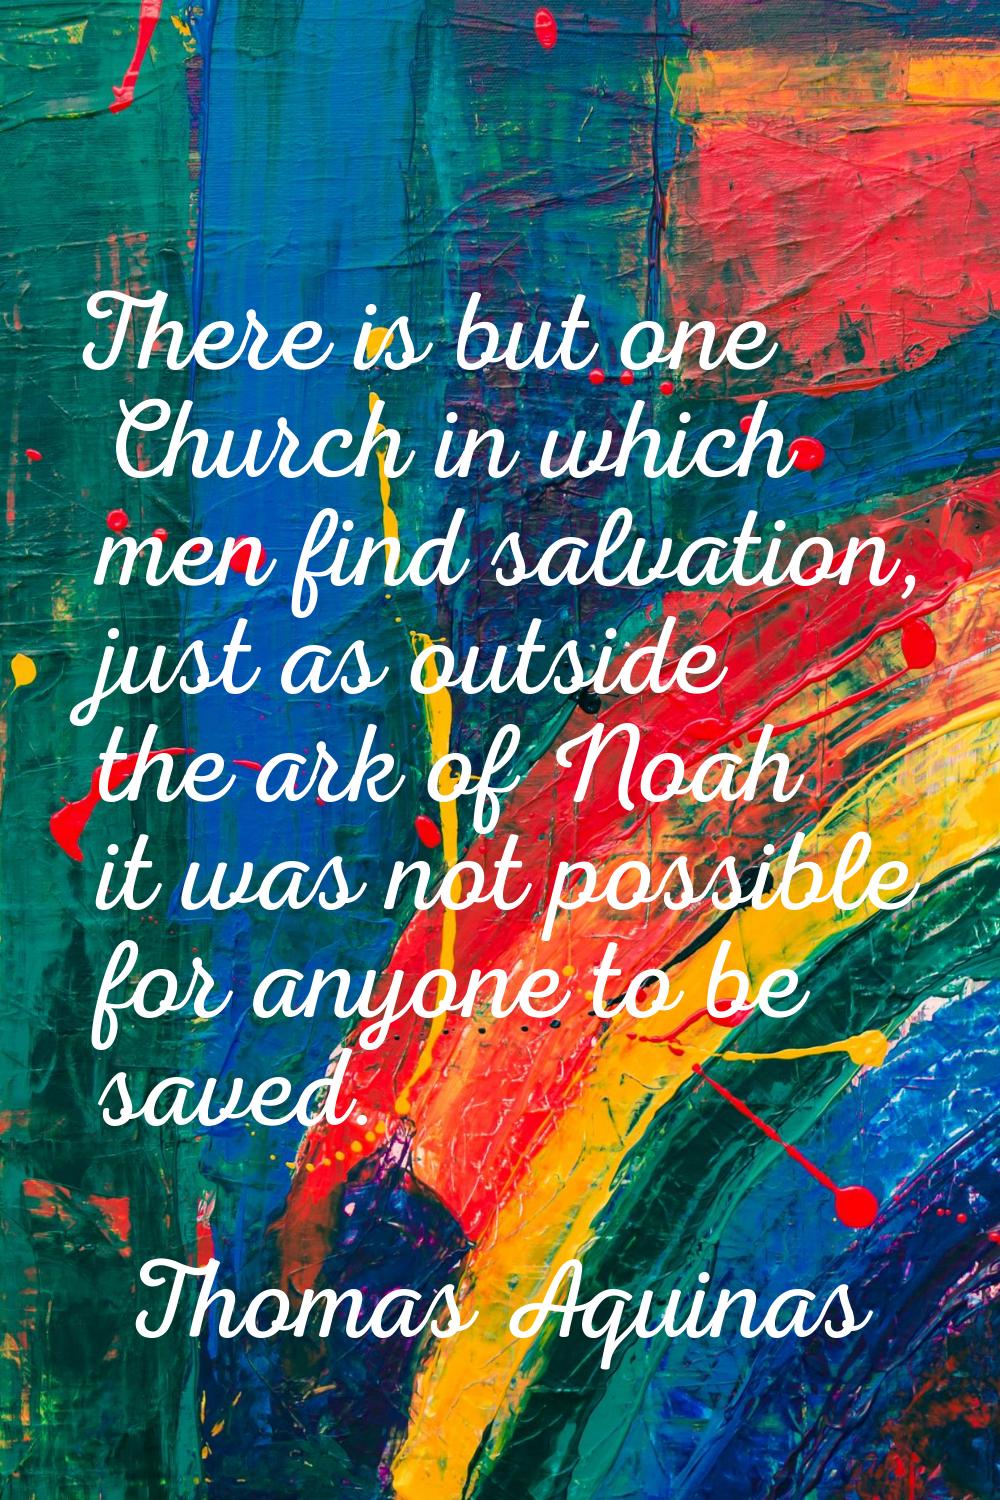 There is but one Church in which men find salvation, just as outside the ark of Noah it was not pos